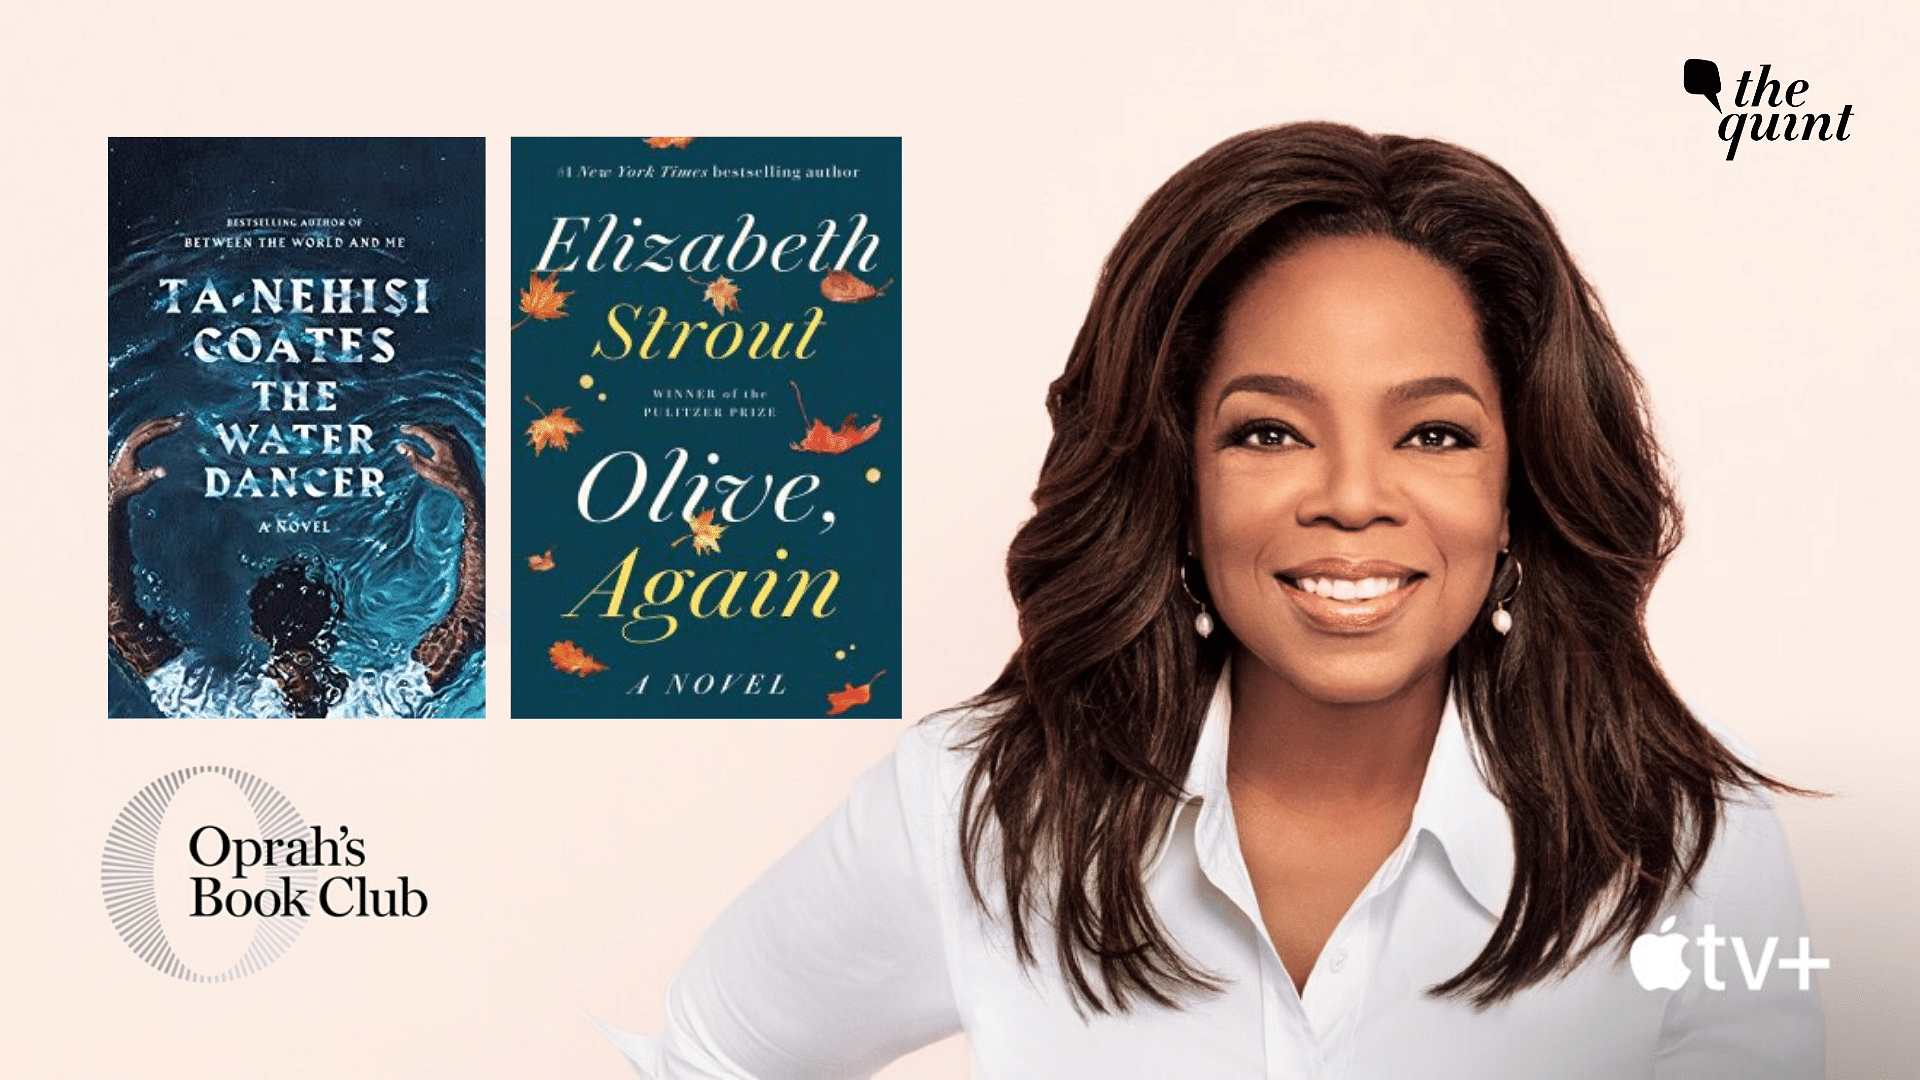 Oprah’s Book Club sticks to status quo, with award-winning authors as its first guests.